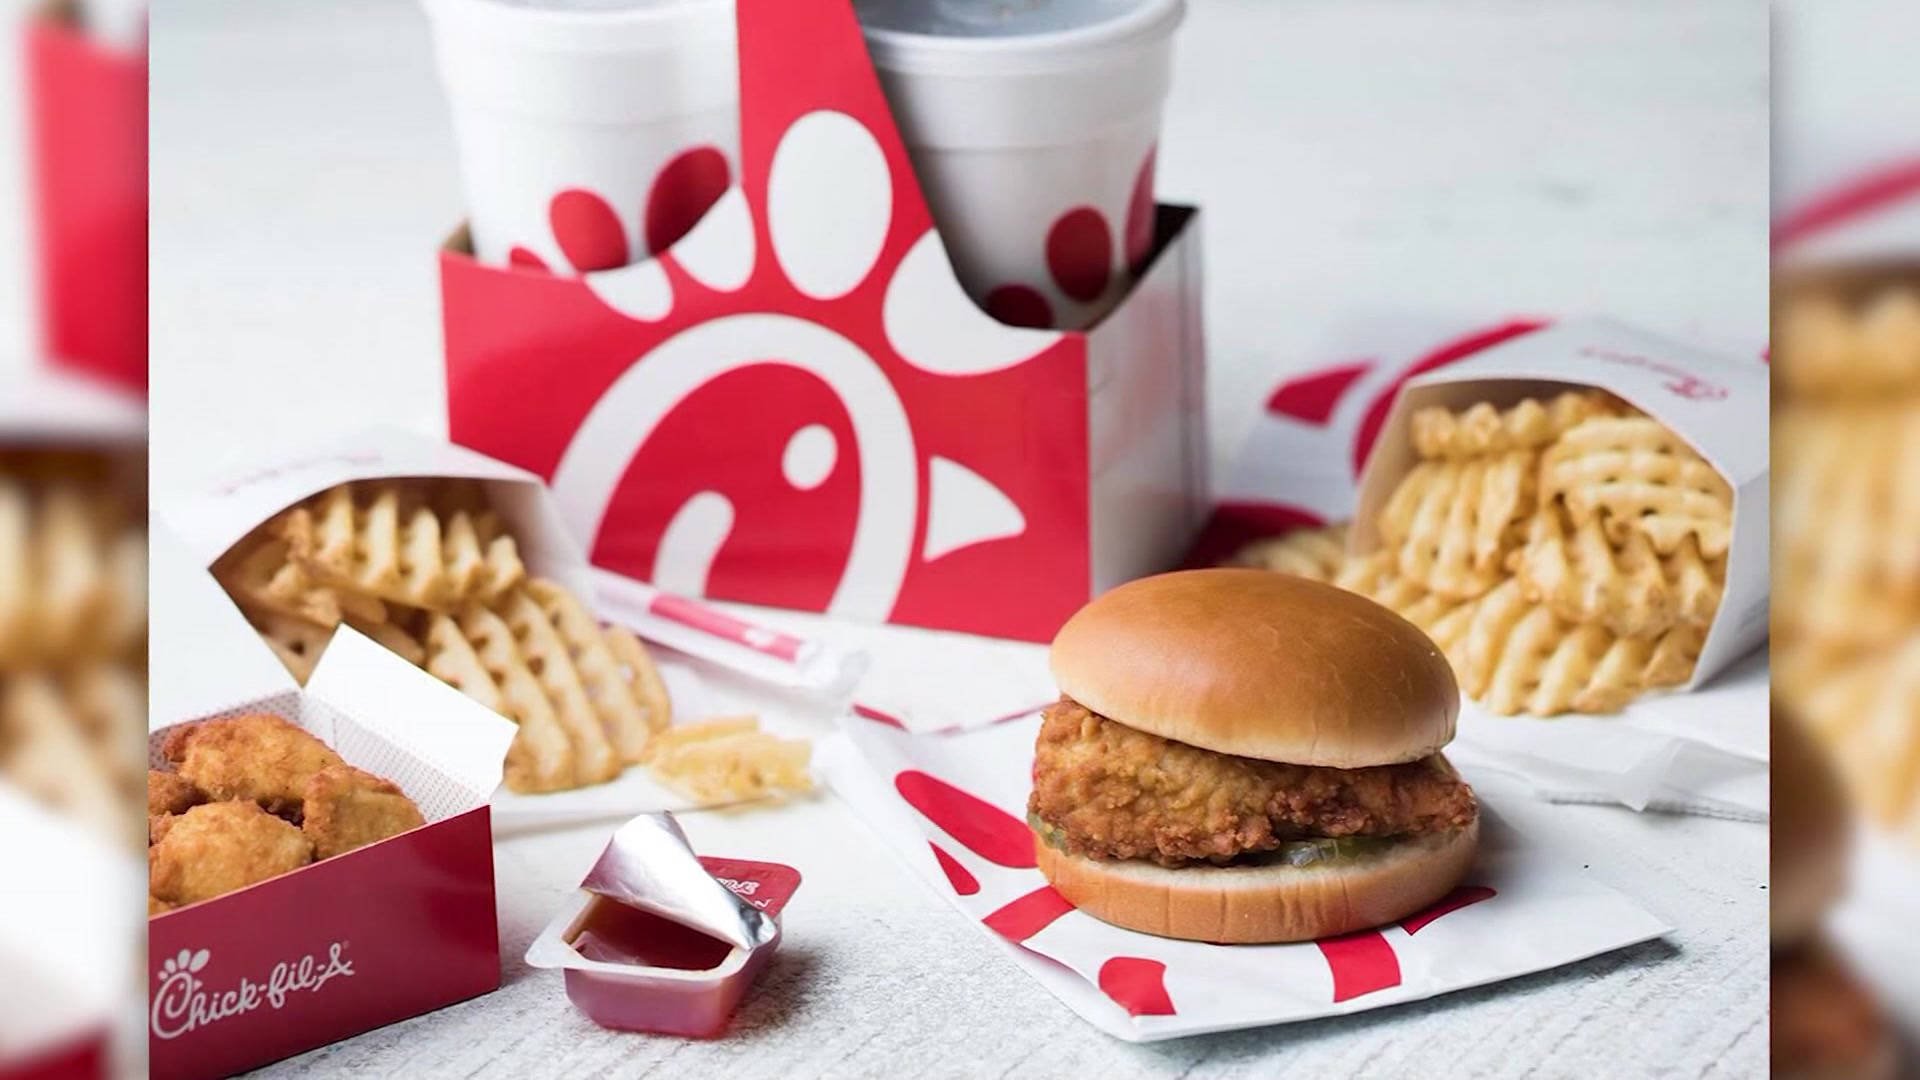 Chick Fil A Variety Meals Wallpaper